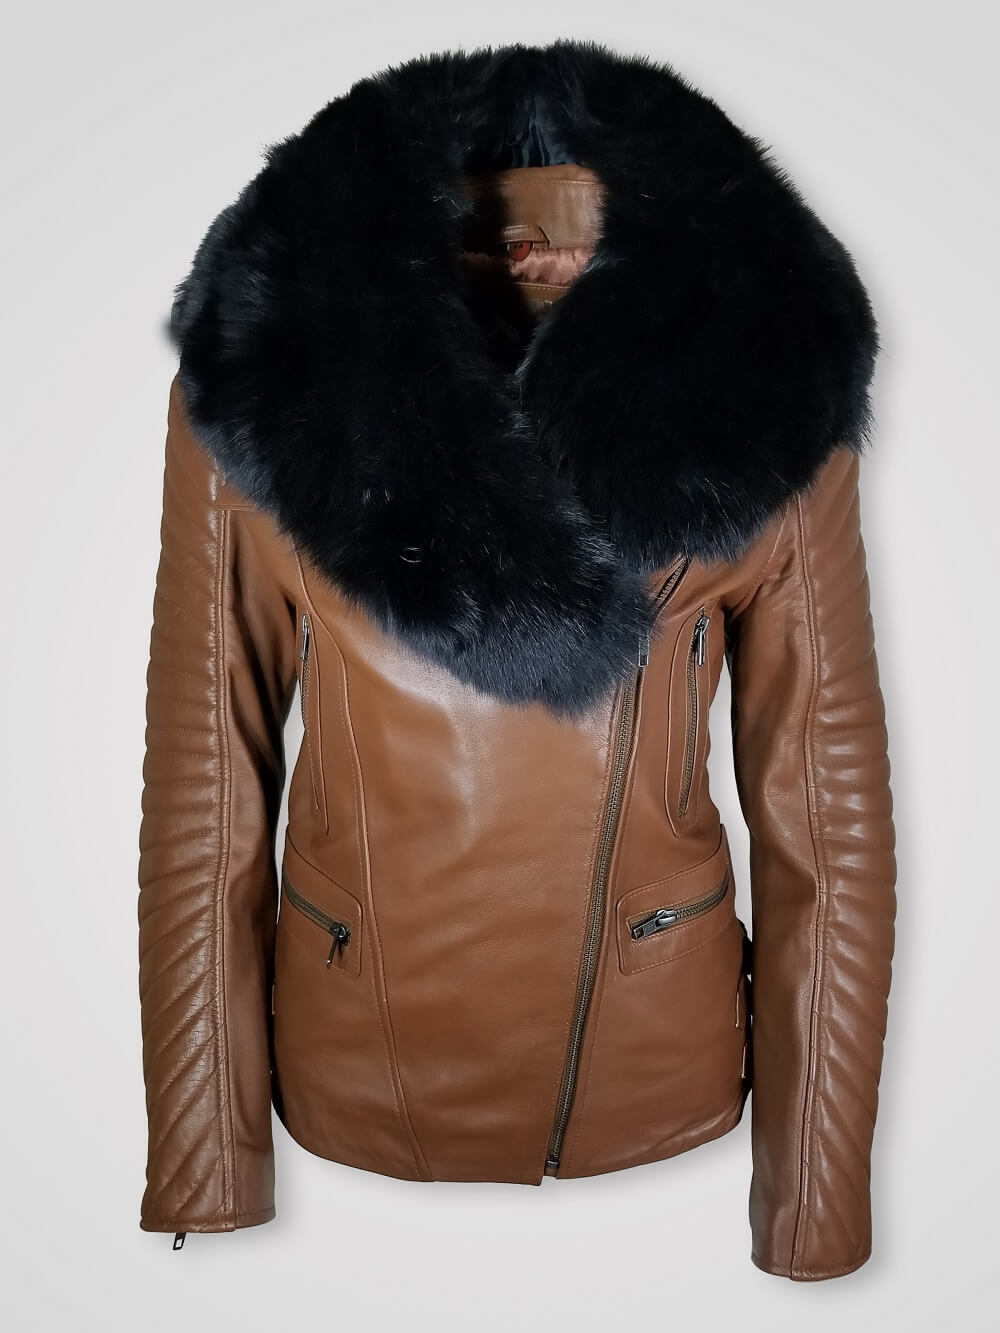 Black shearling collar pure leather jacket for women - Alen Cooper